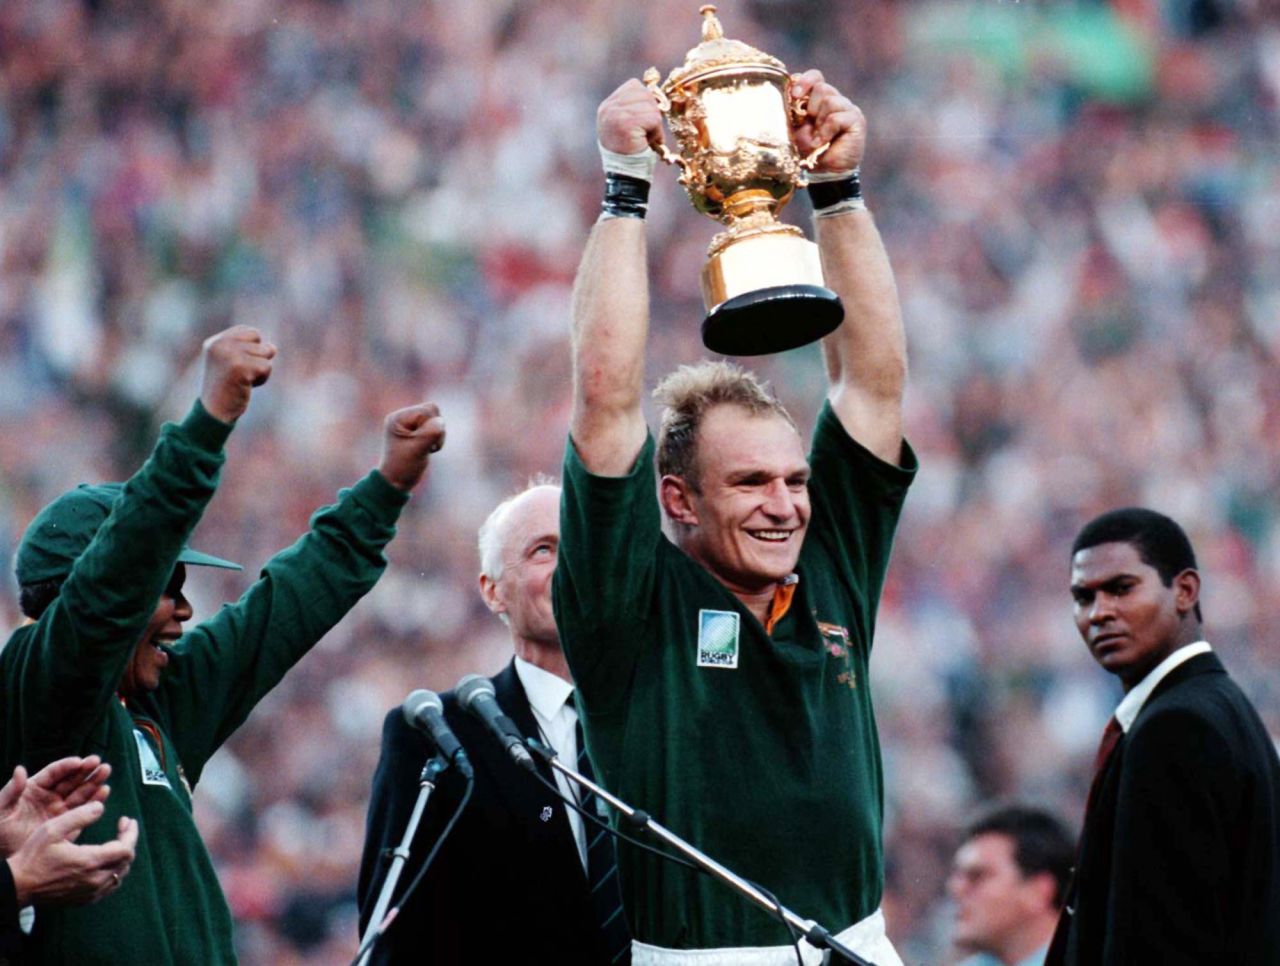 Mandela, left, cheers as Springbok Rugby captain Francois Pienaar holds the Webb Ellis trophy high after winning the World Cup Rugby Championship in Johannesburg on June 24, 1995.  